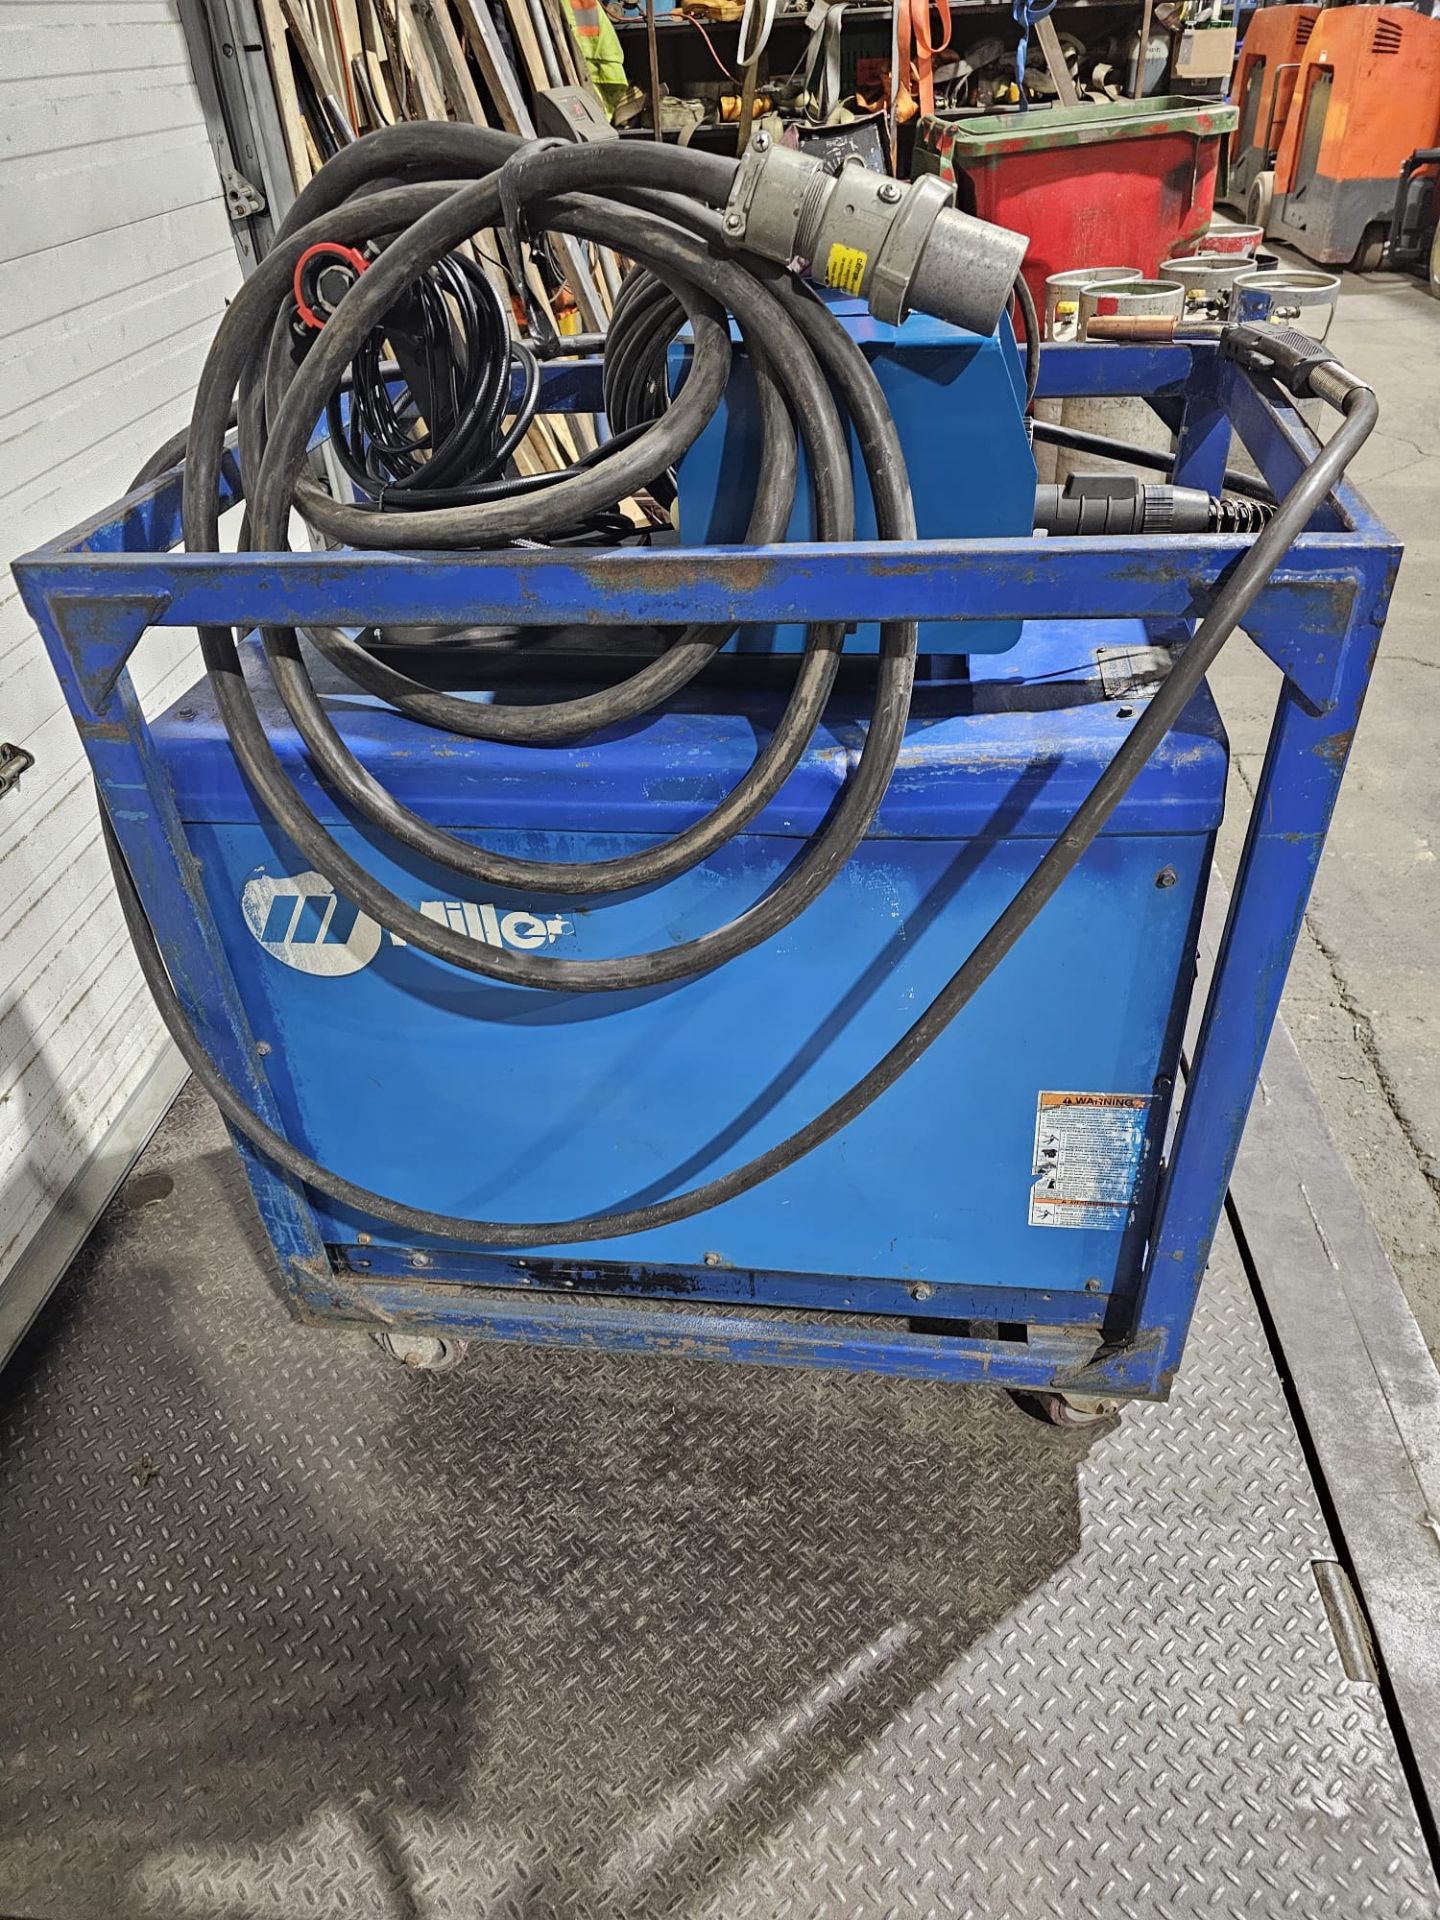 Miller Dimension 652 Mig Welder 650 Amp Mig Tig Stick Multi Process Power Source with 22A Wire - Image 2 of 9